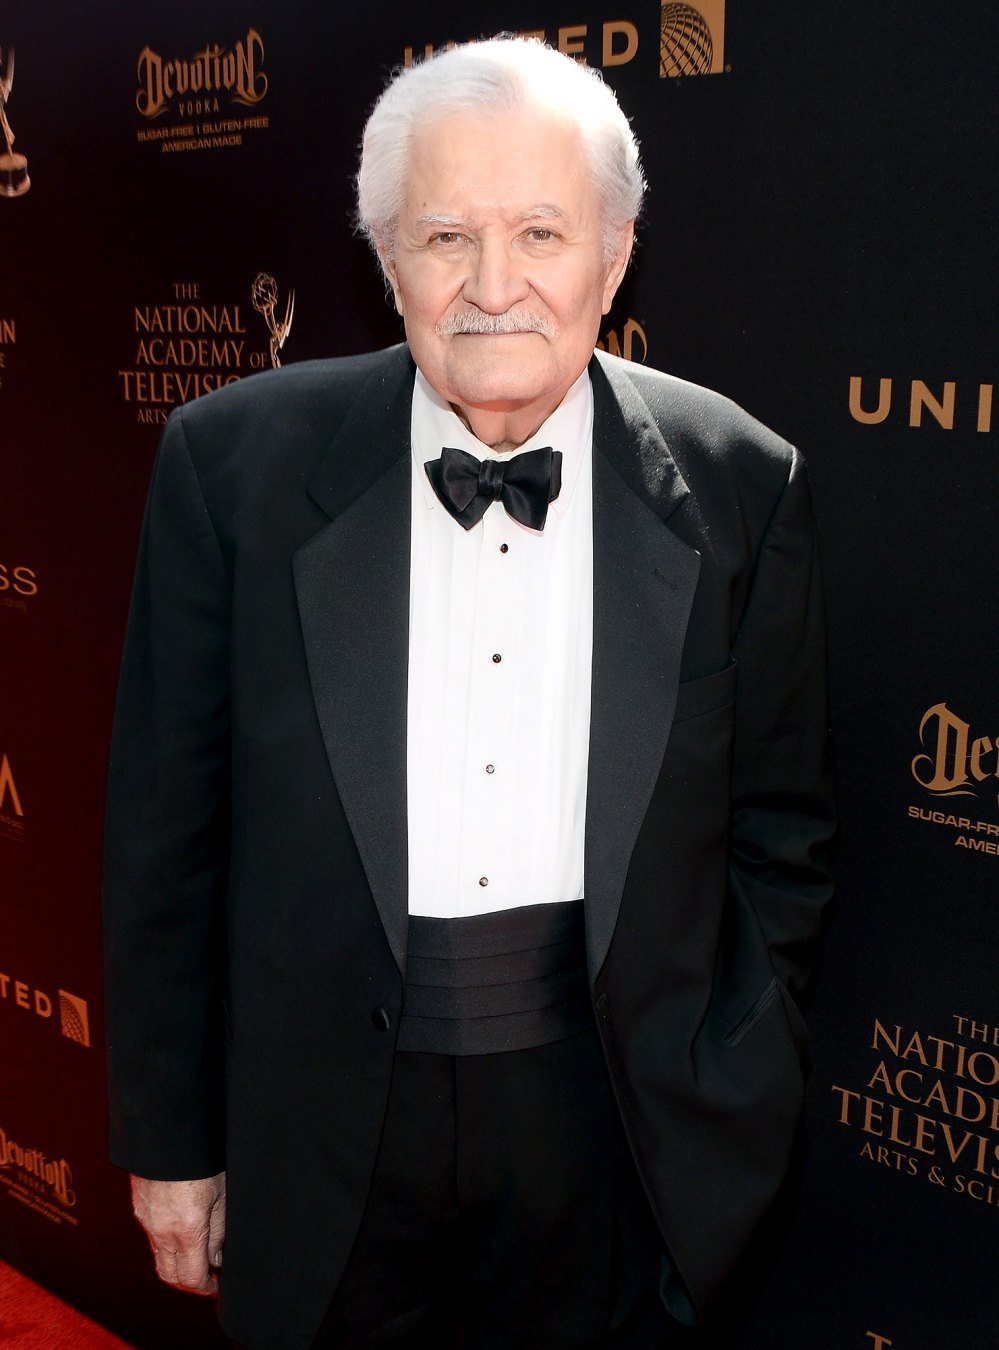 The Fate of John Aniston's 'Days of Our Lives' Character Revealed Nine Months After His Death